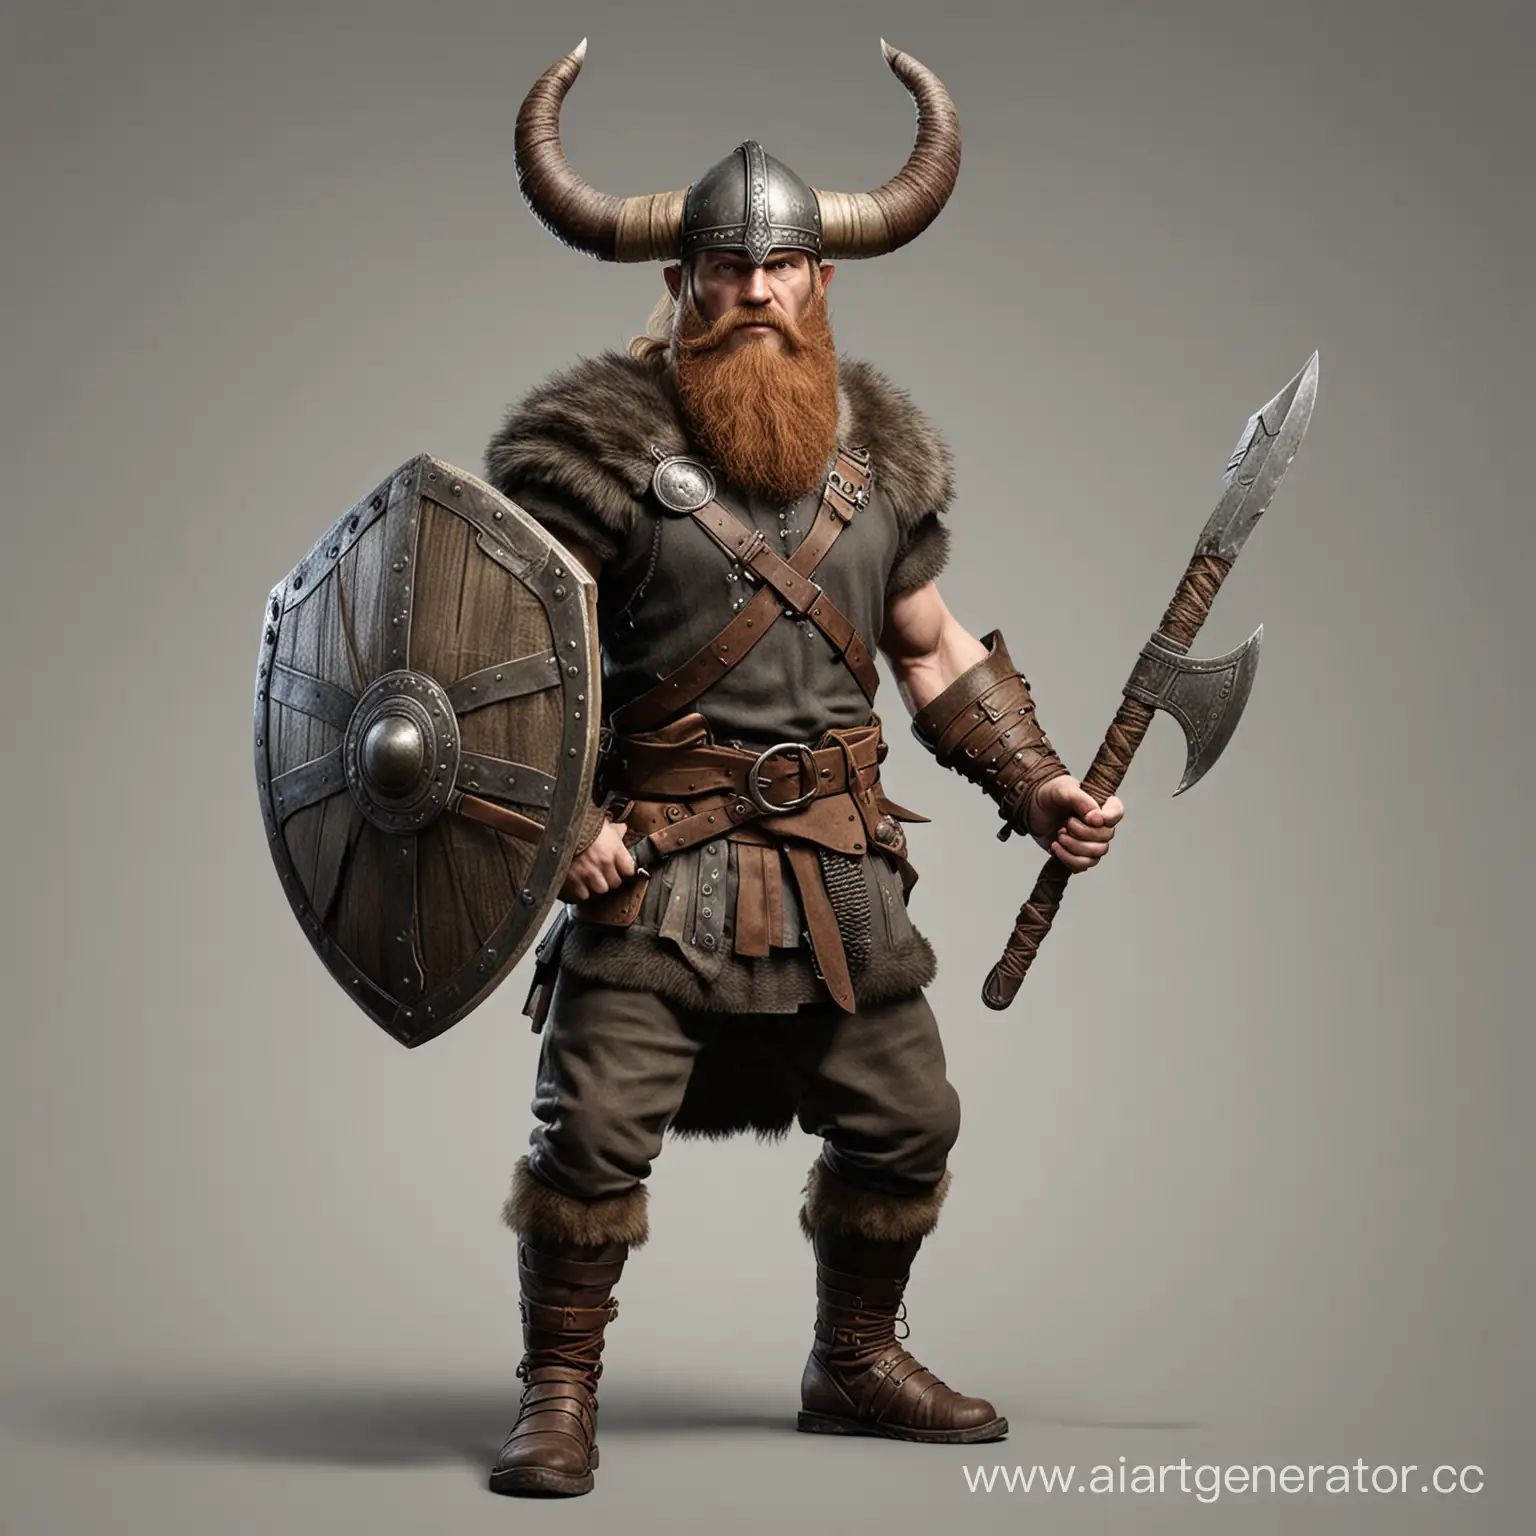 Realistic-Viking-Warrior-with-Horned-Helmet-and-Battle-Gear-in-Action-Pose